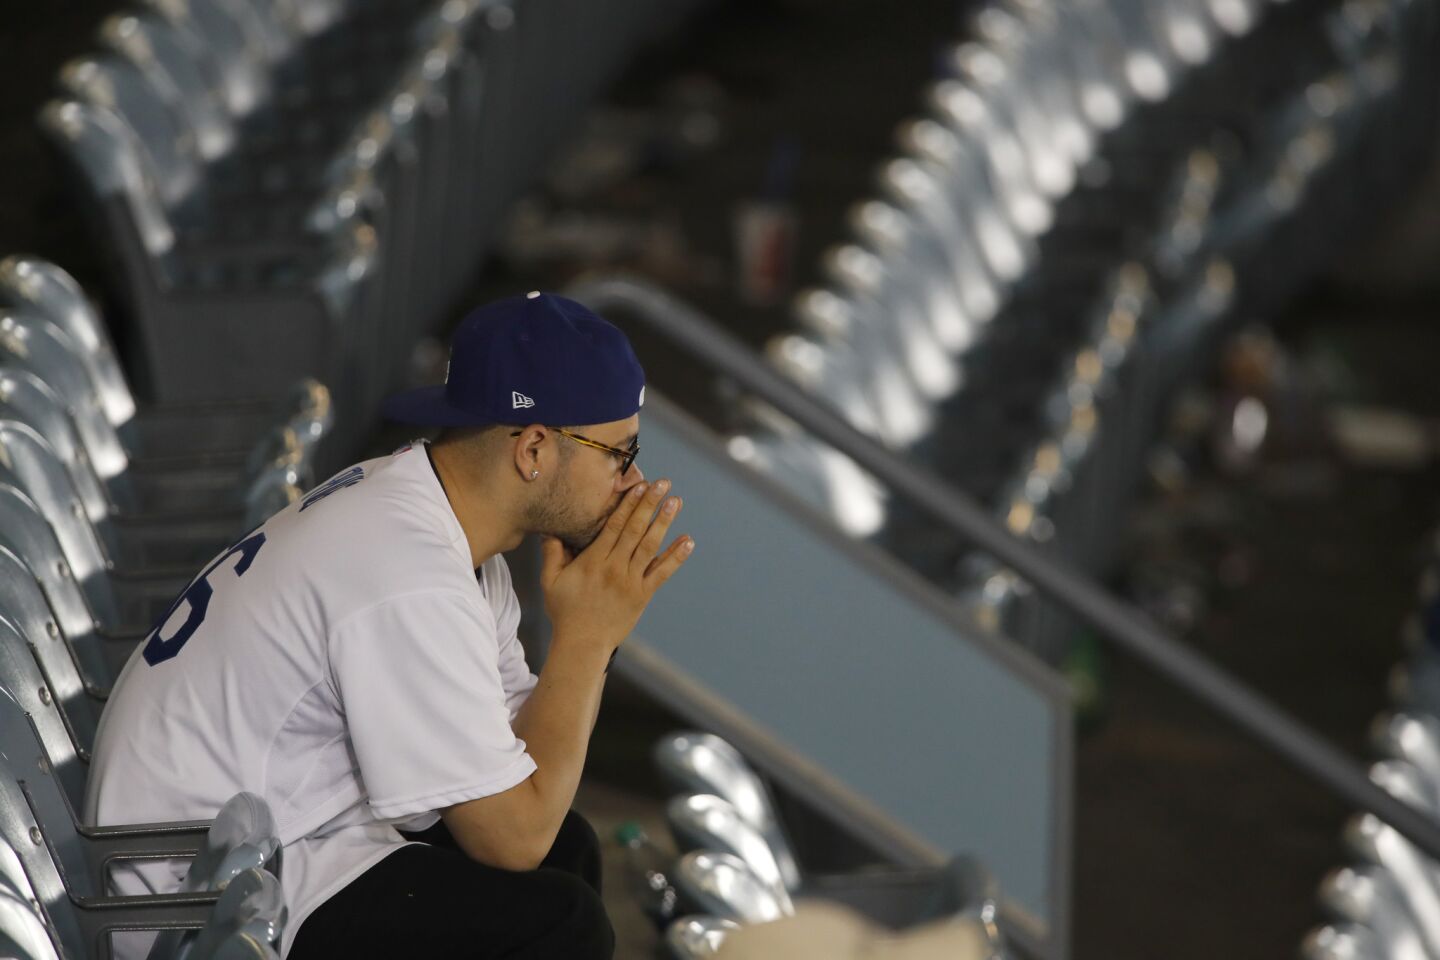 A lone Dodger fan watches the Houston Astros celebrate their 5-1 victory.